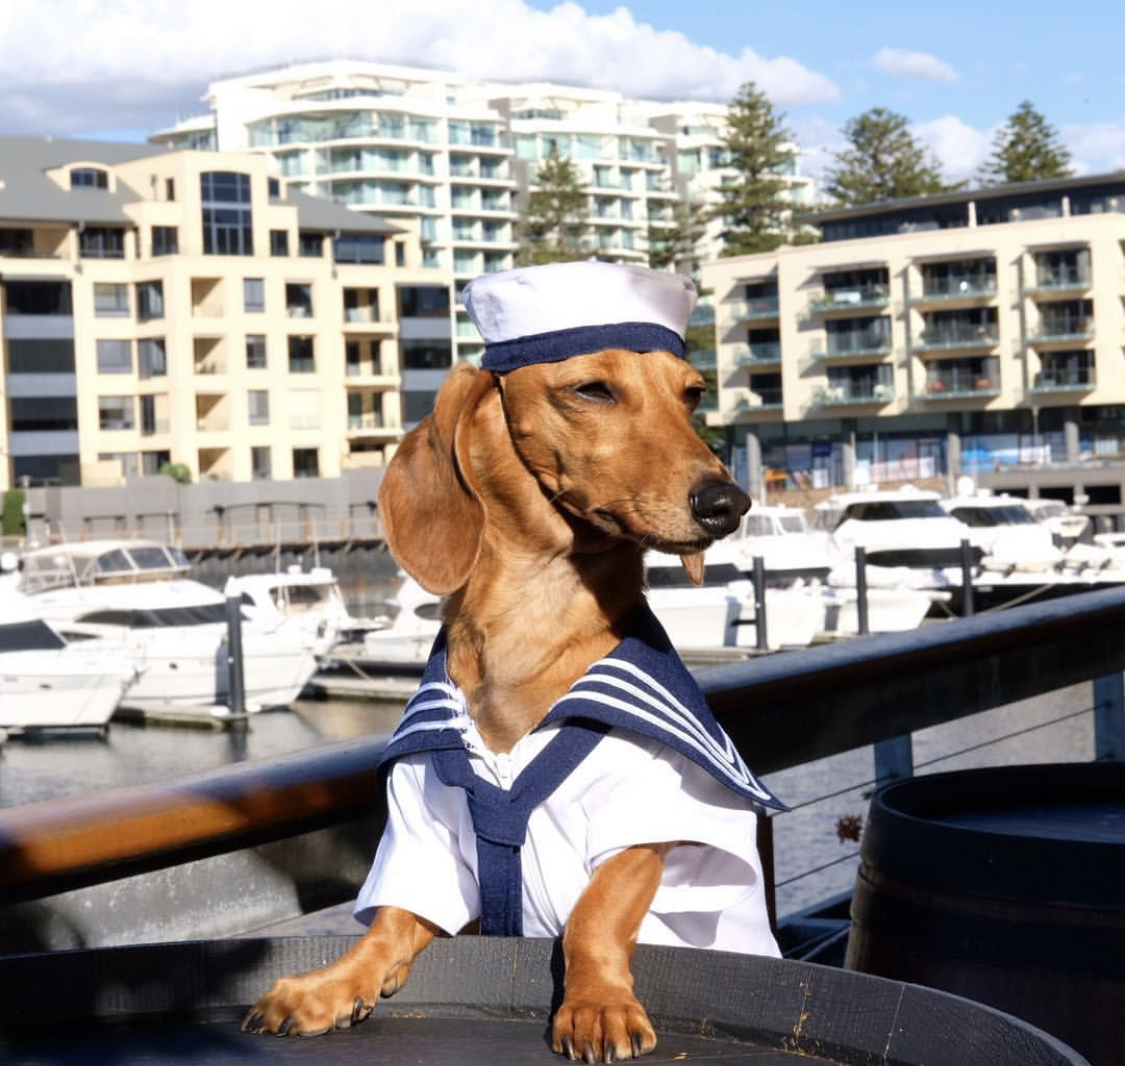 Dachshund wearing a sailor outfit